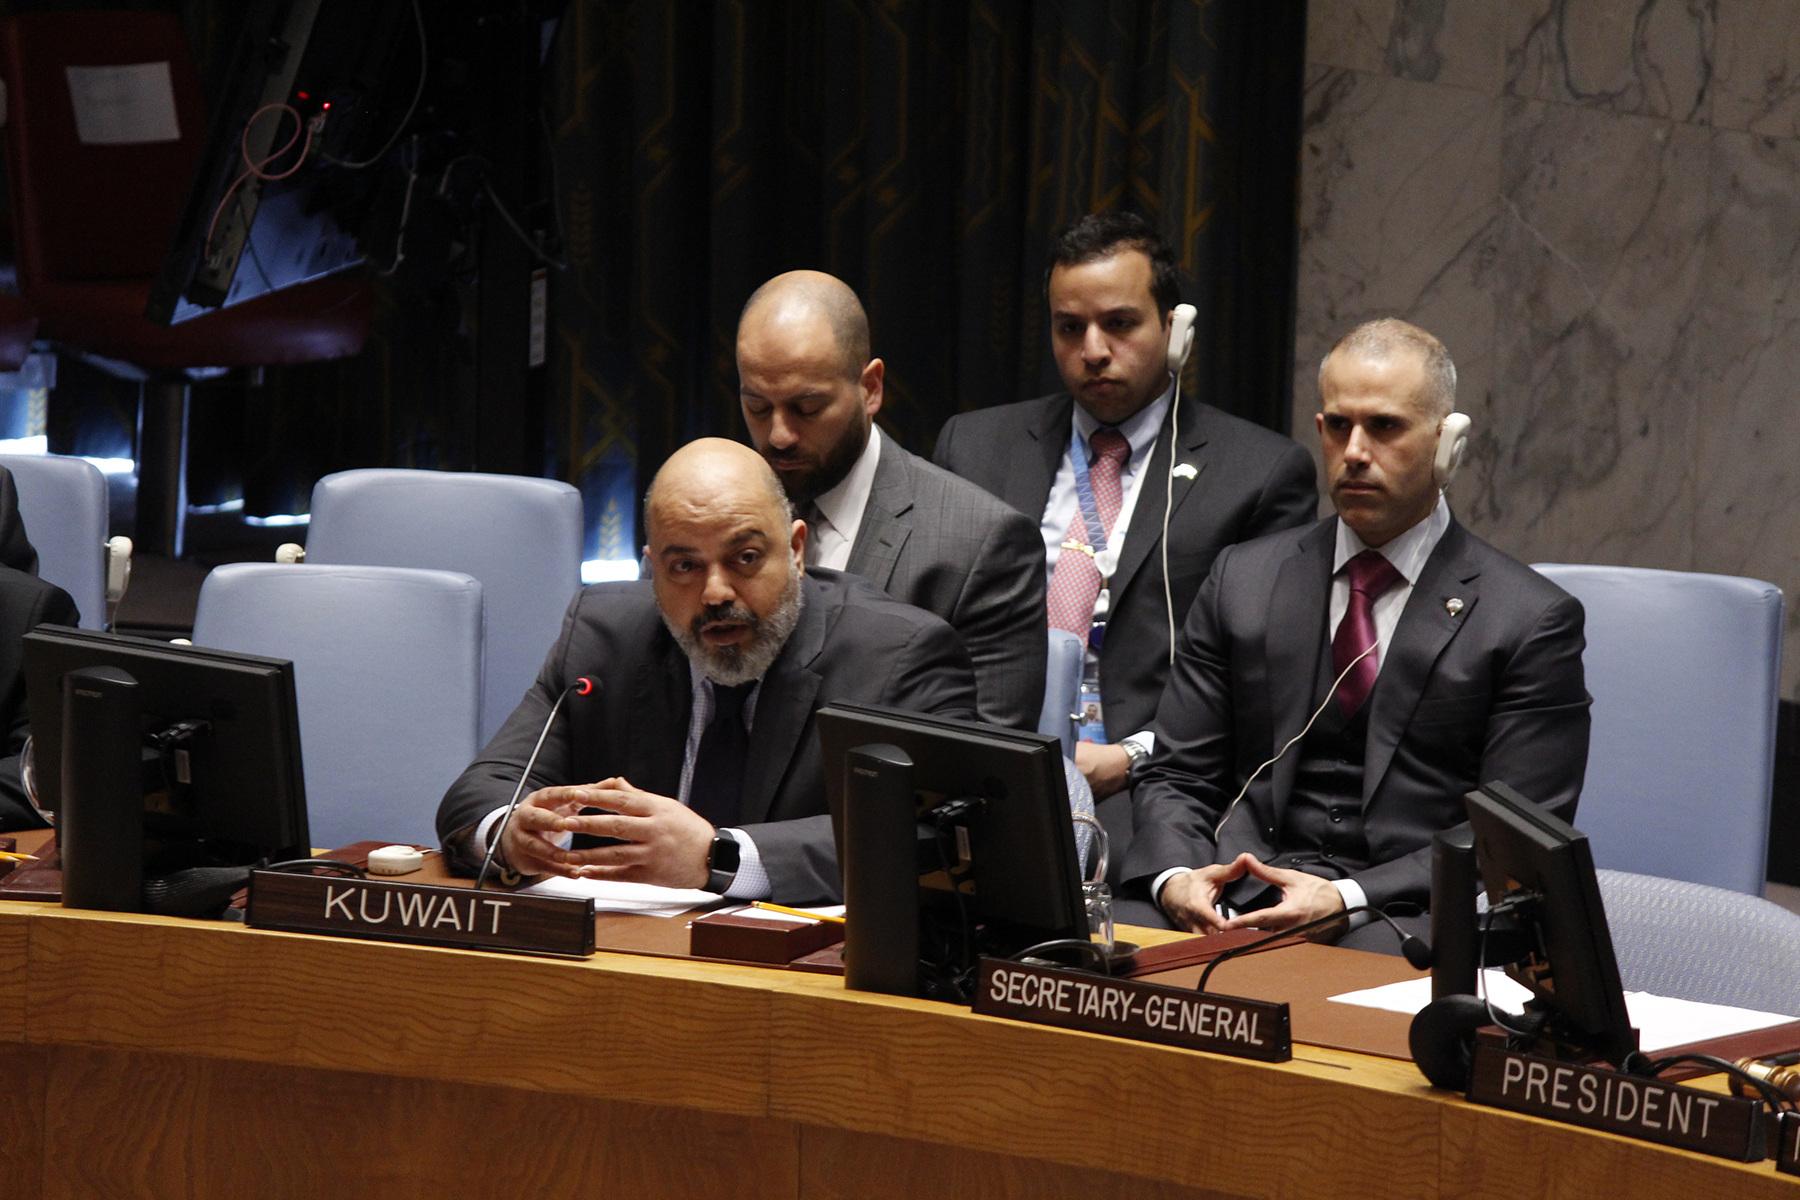 Kuwait delegate Tareq M. Al-Banai during the UN Security Council meeting on the situation in the region